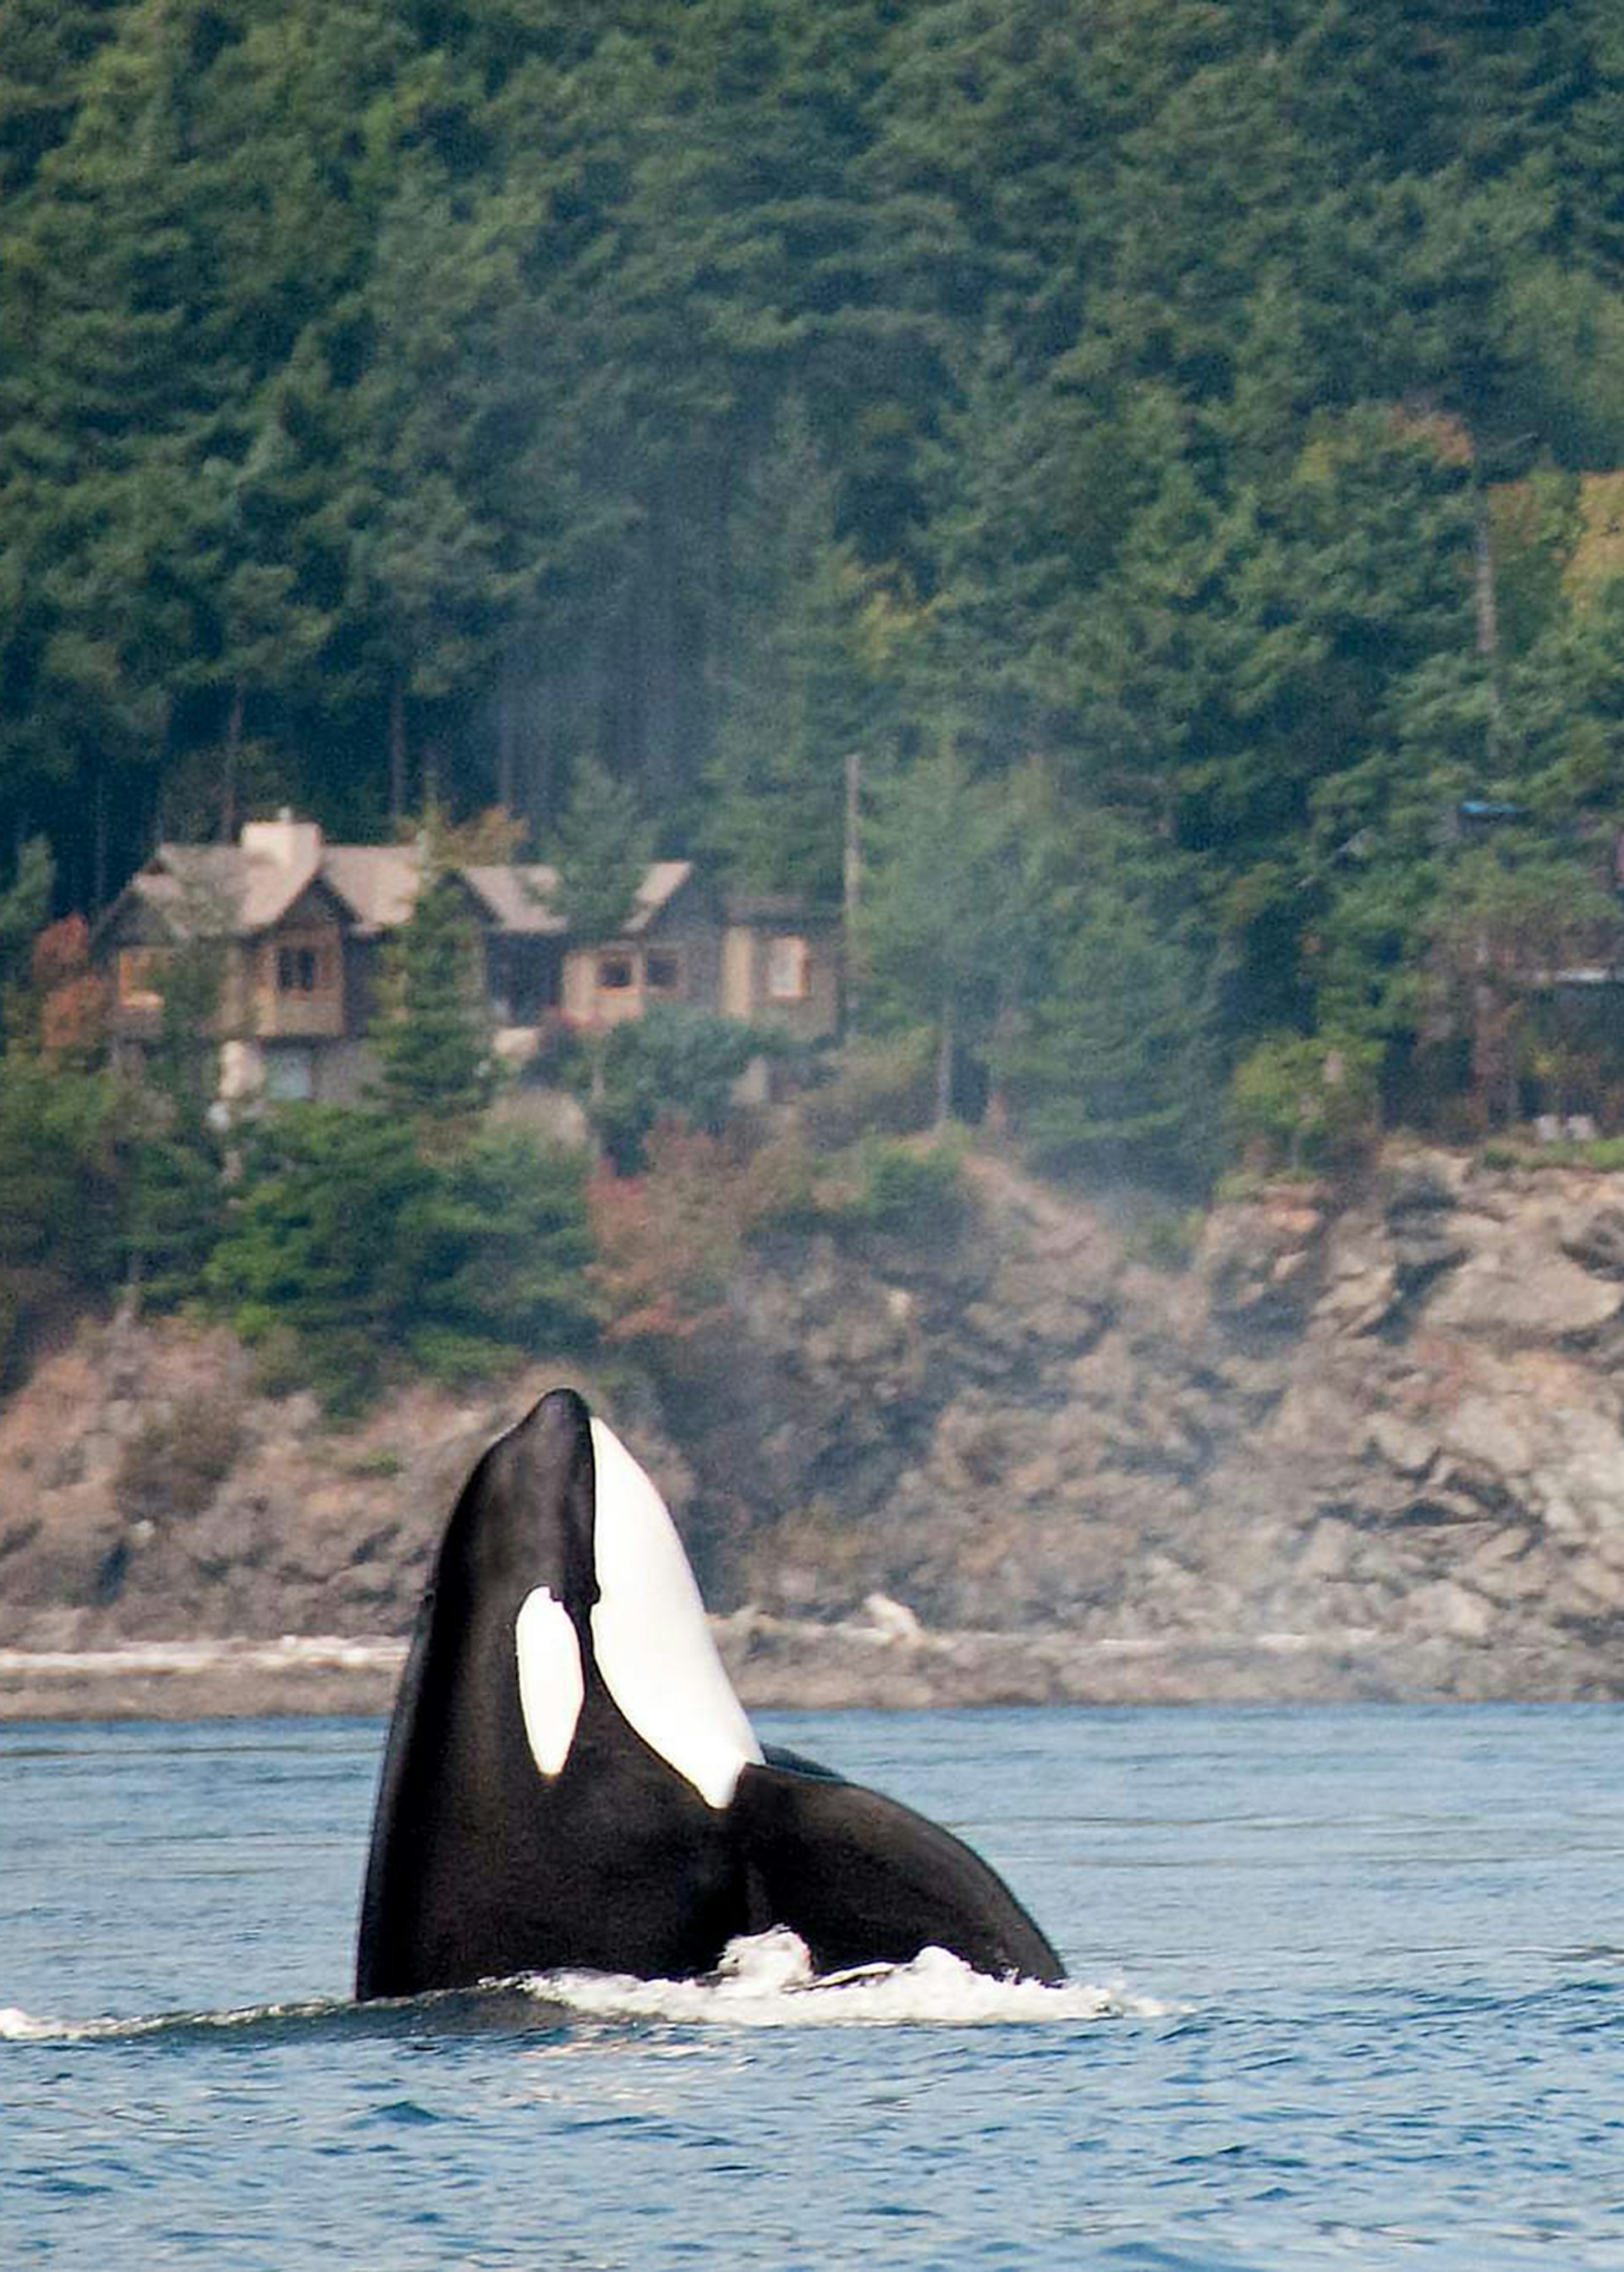 An Orca surfacing in the San Juan Islands, Washington State © roclwyr / Getty Images